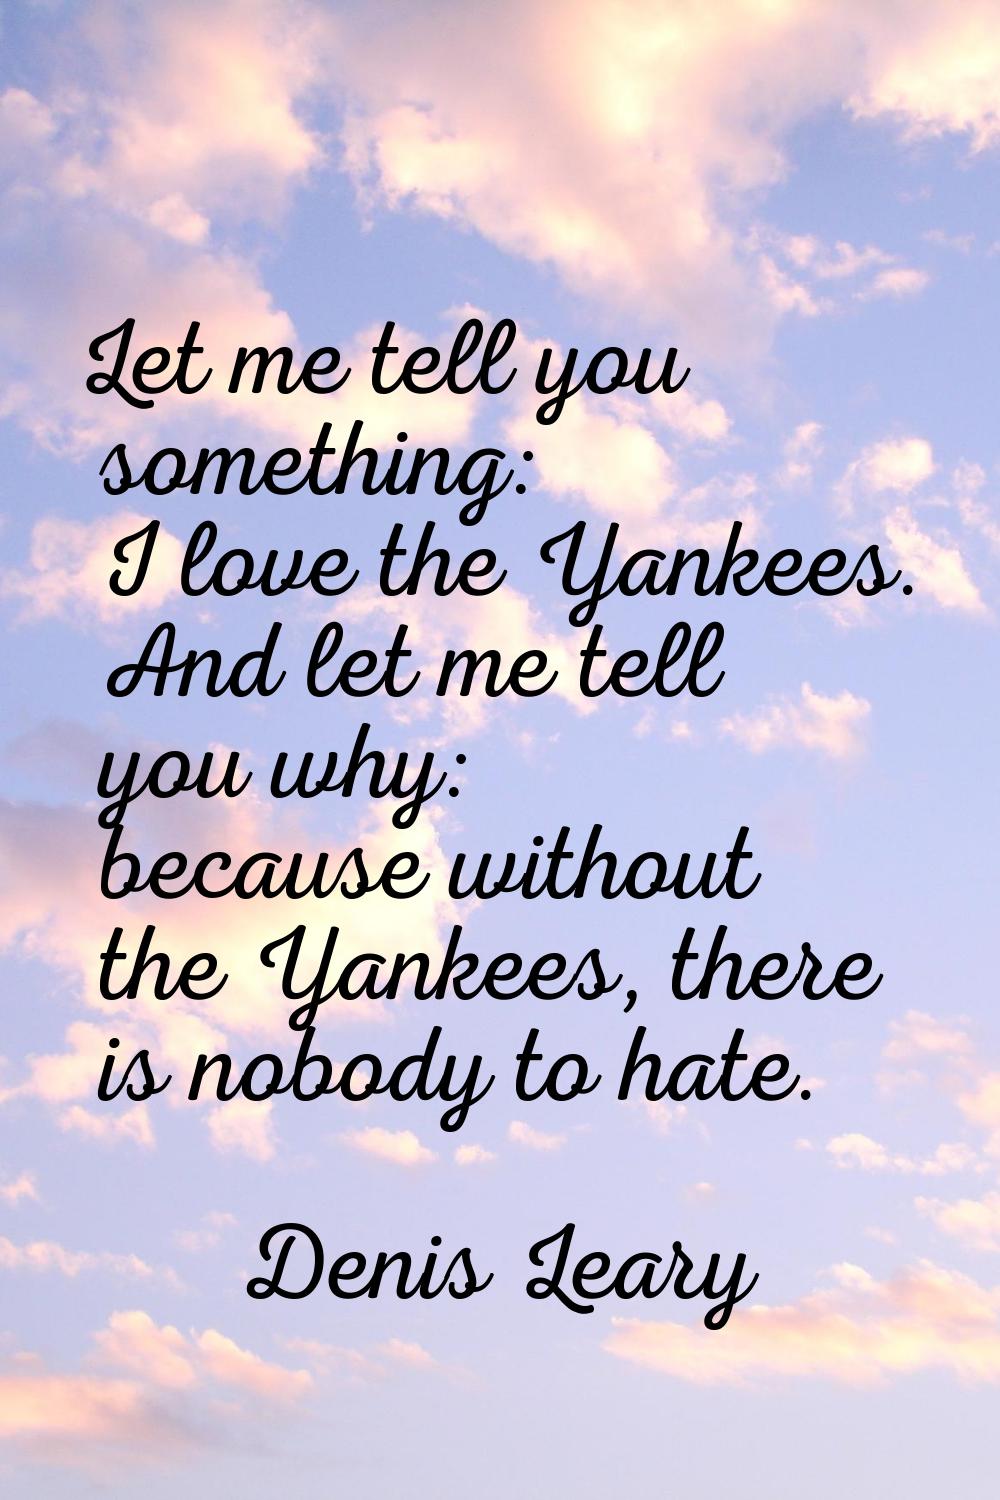 Let me tell you something: I love the Yankees. And let me tell you why: because without the Yankees